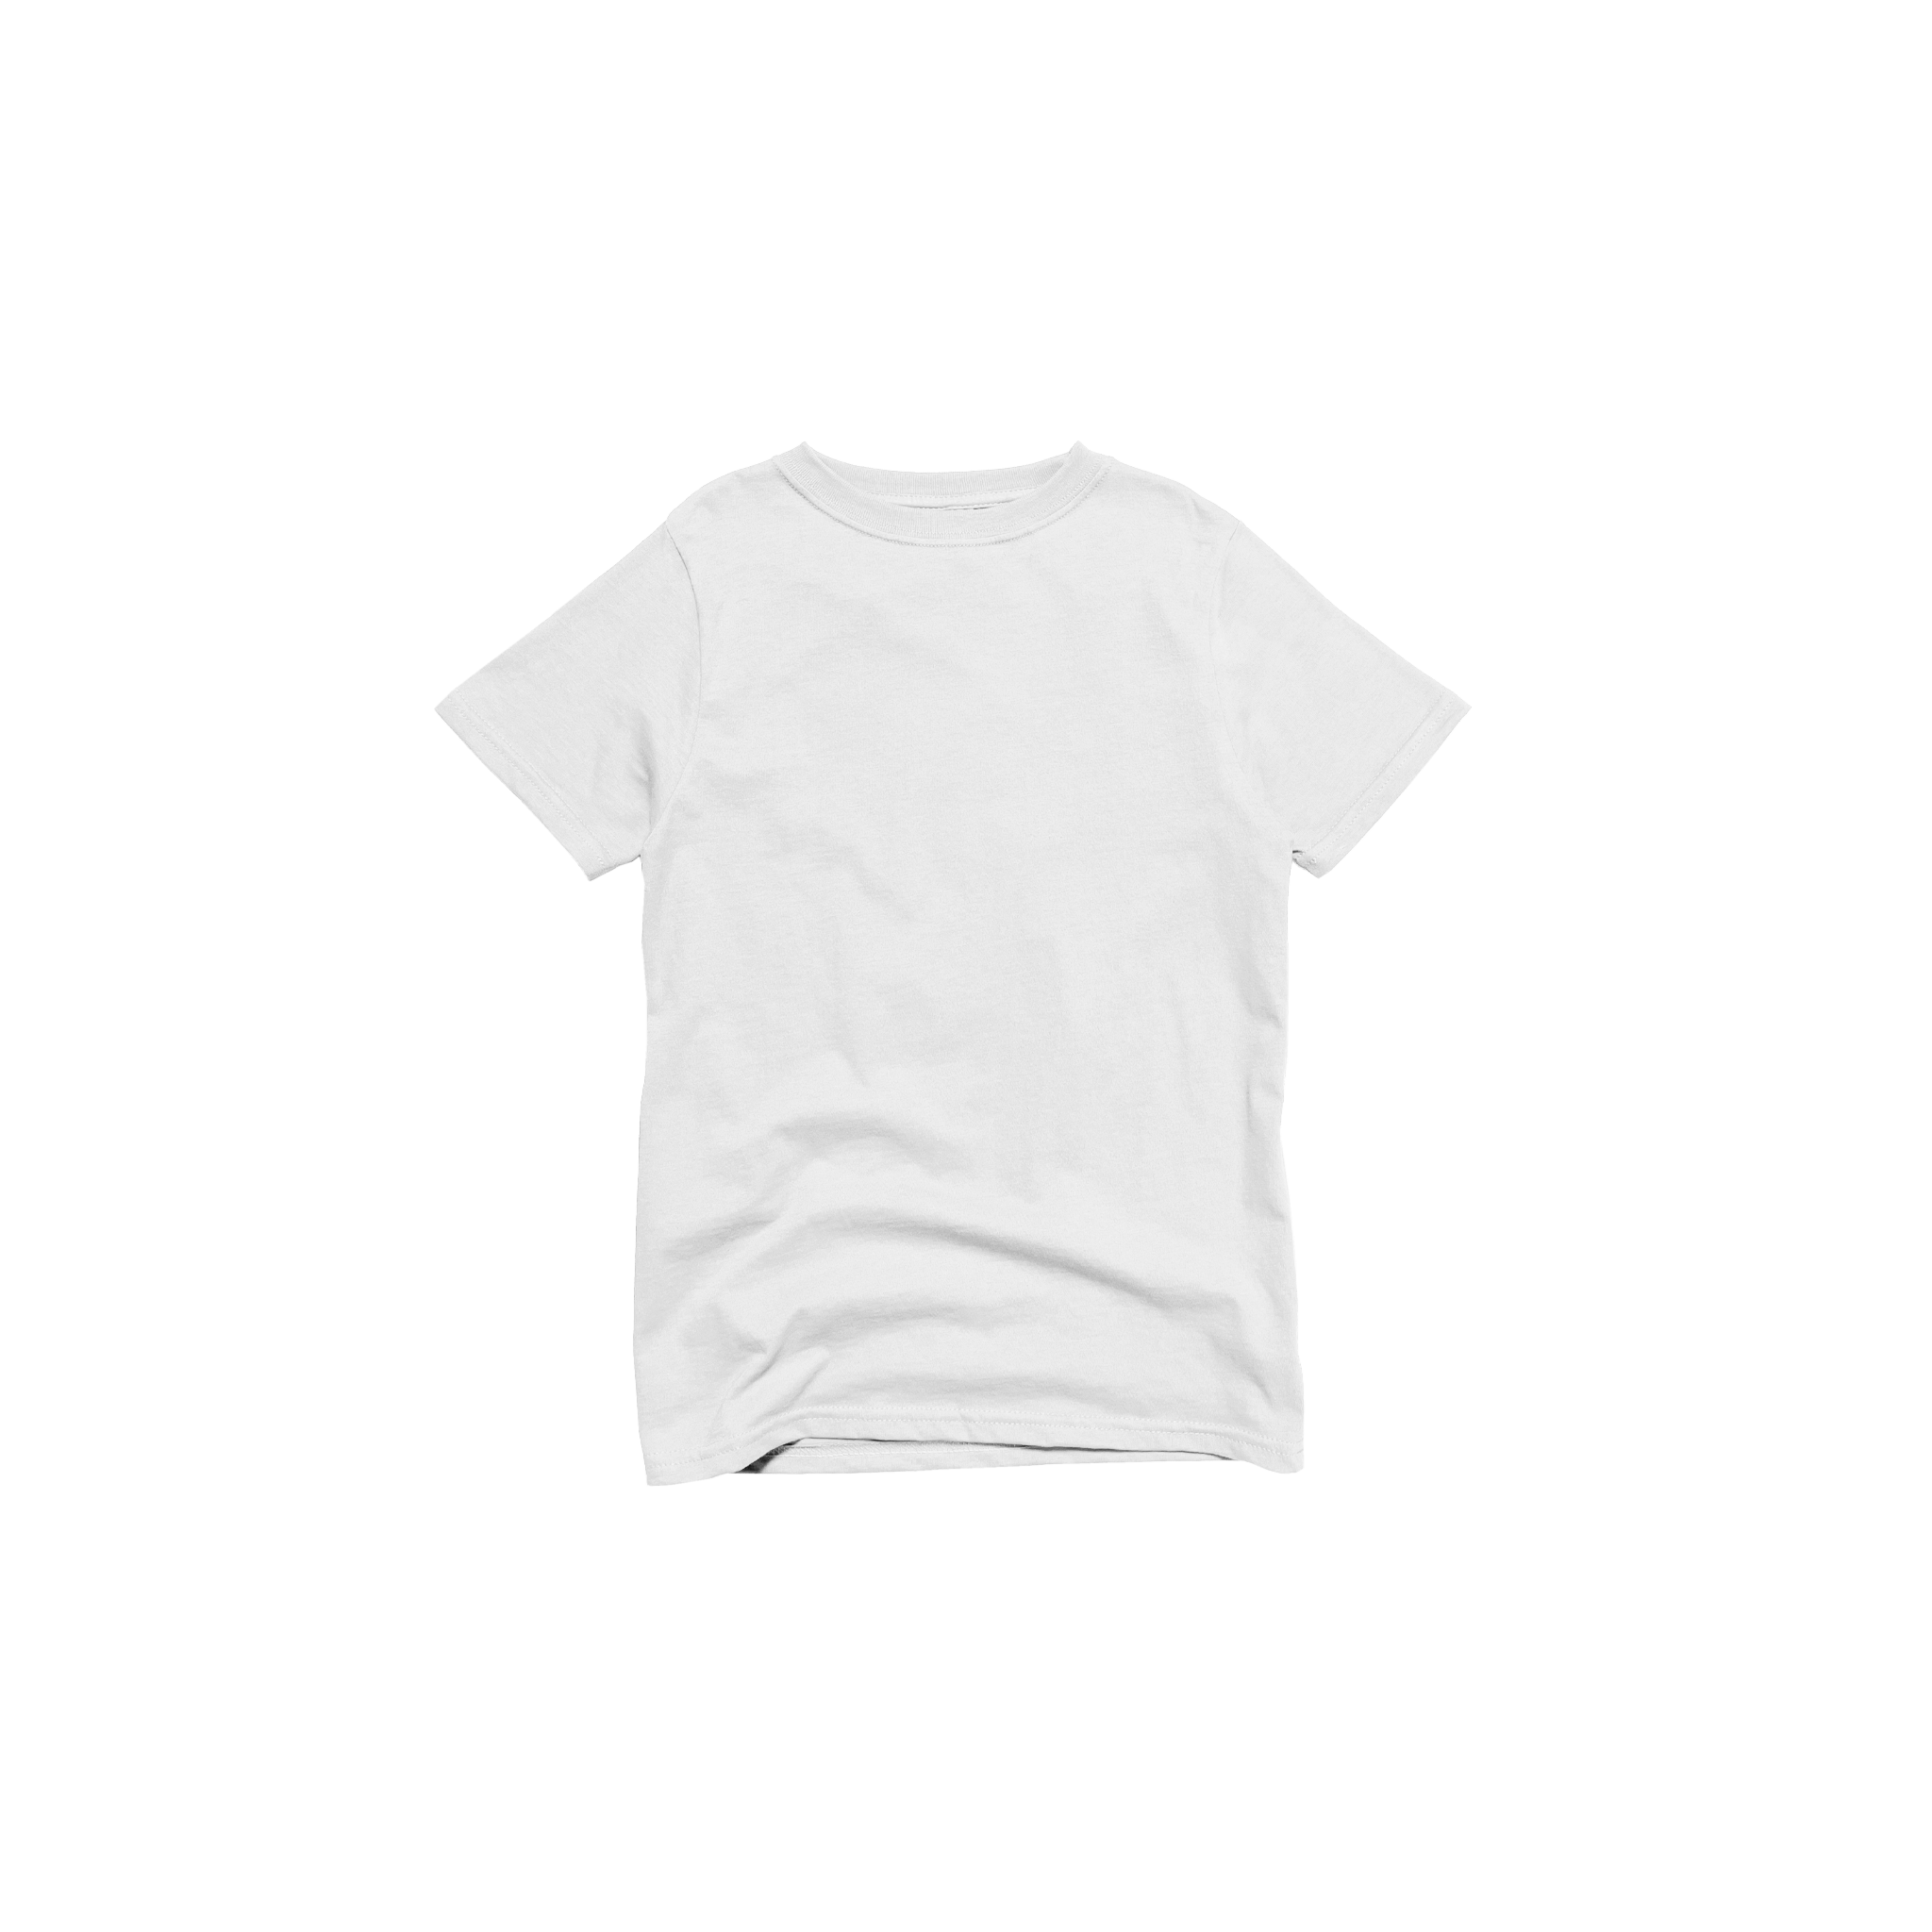 Front Flat Lay of GOEX Youth Cotton Tee in White